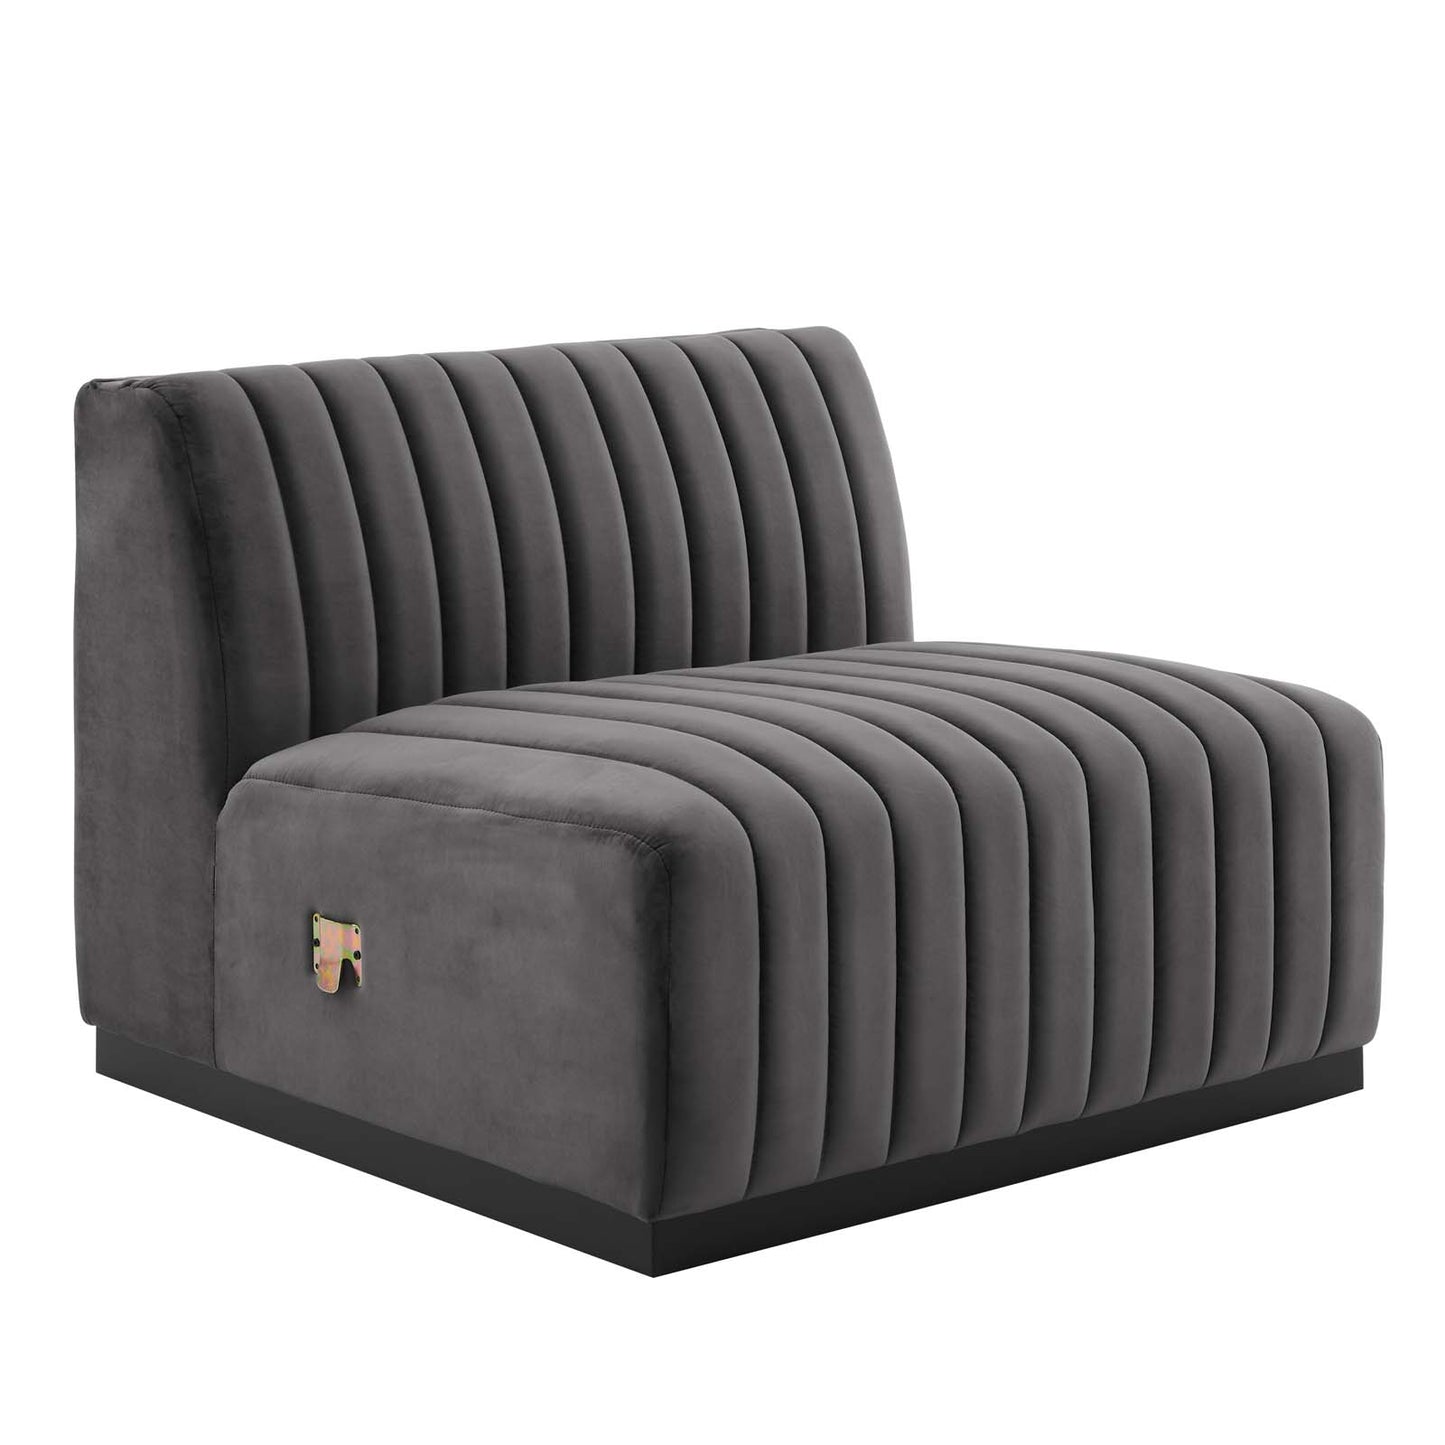 Conjure Channel Tufted Performance Velvet 5-Piece Sectional Black Gray EEI-5771-BLK-GRY